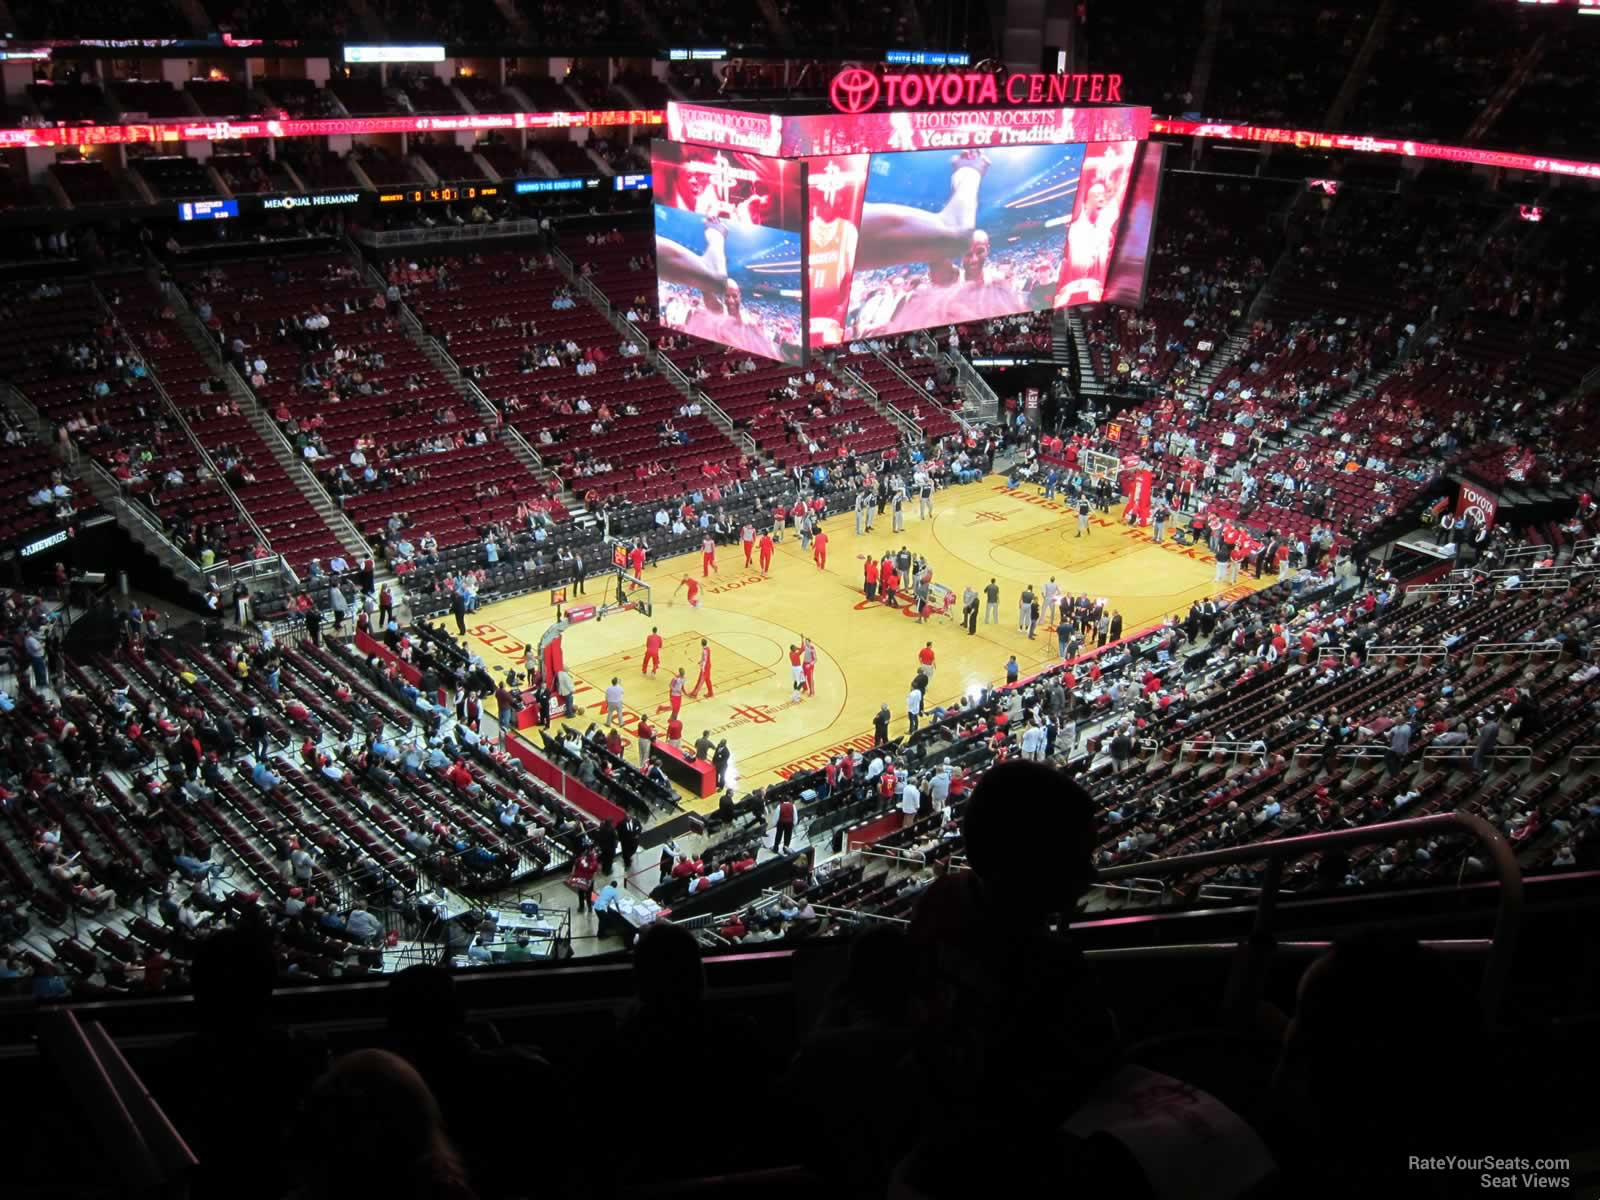 Section 431 at Toyota Center - RateYourSeats.com